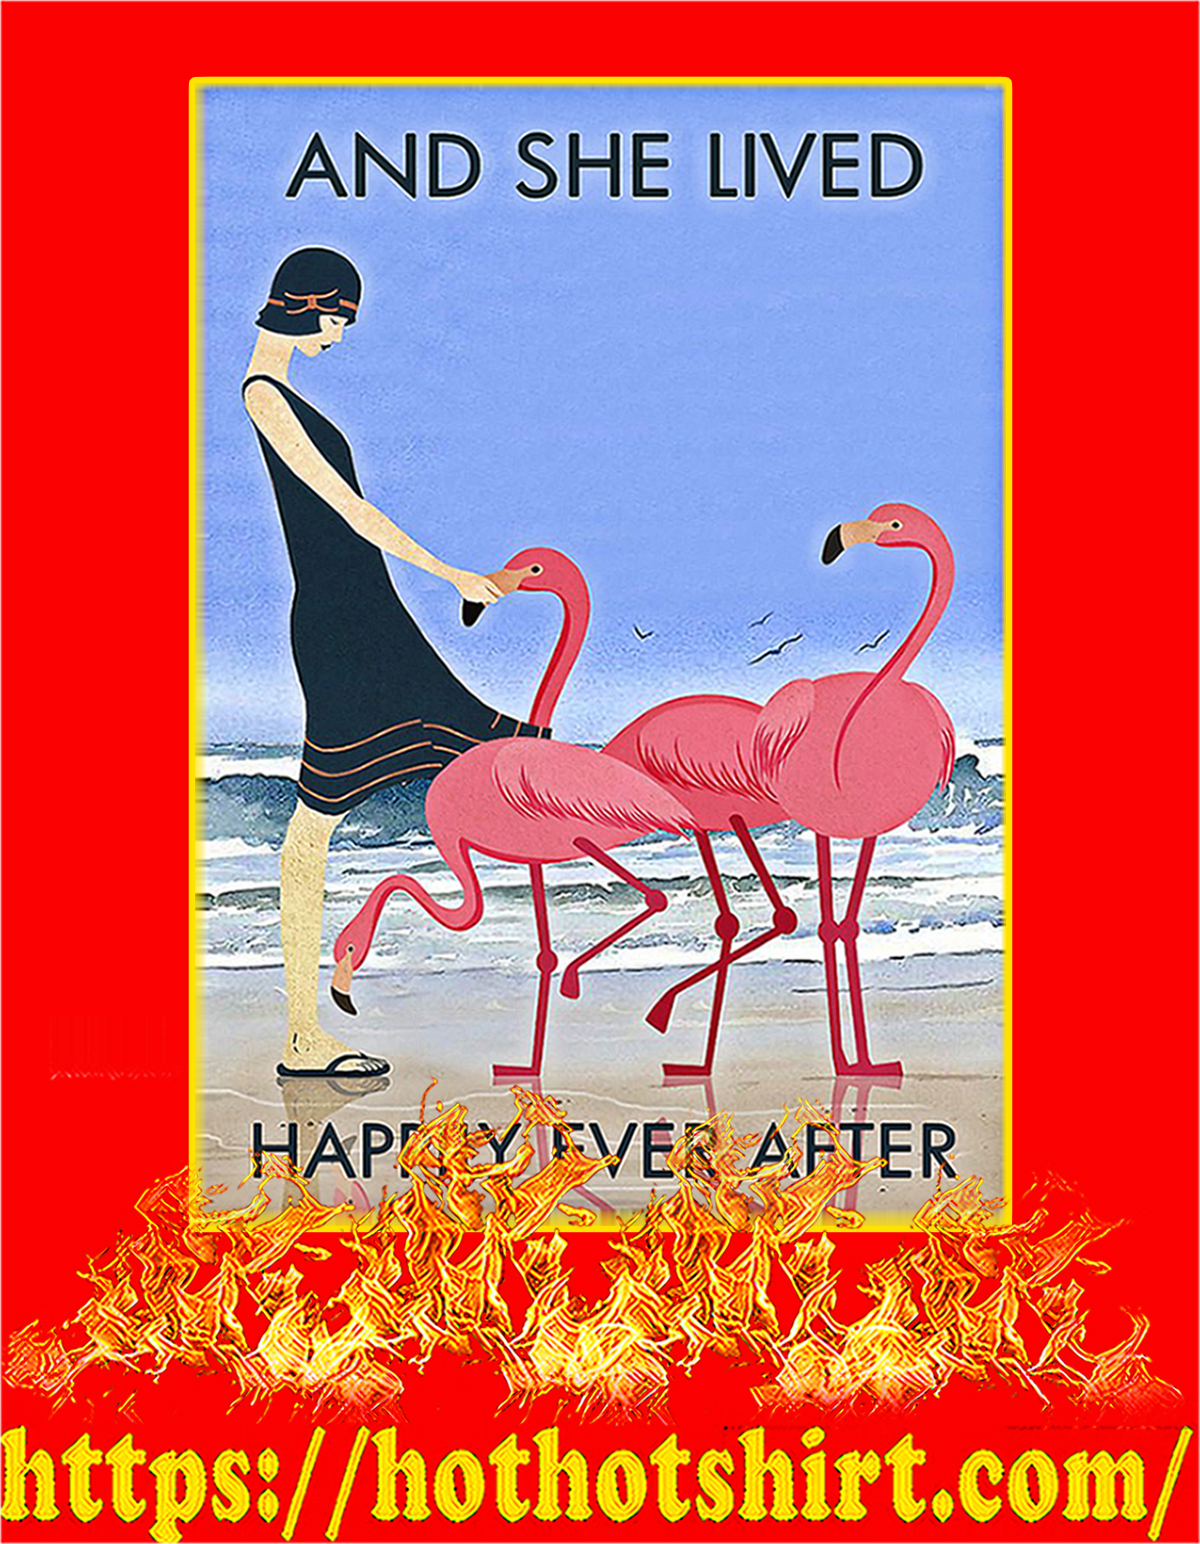 Greyhound And she lived happily ever after poster